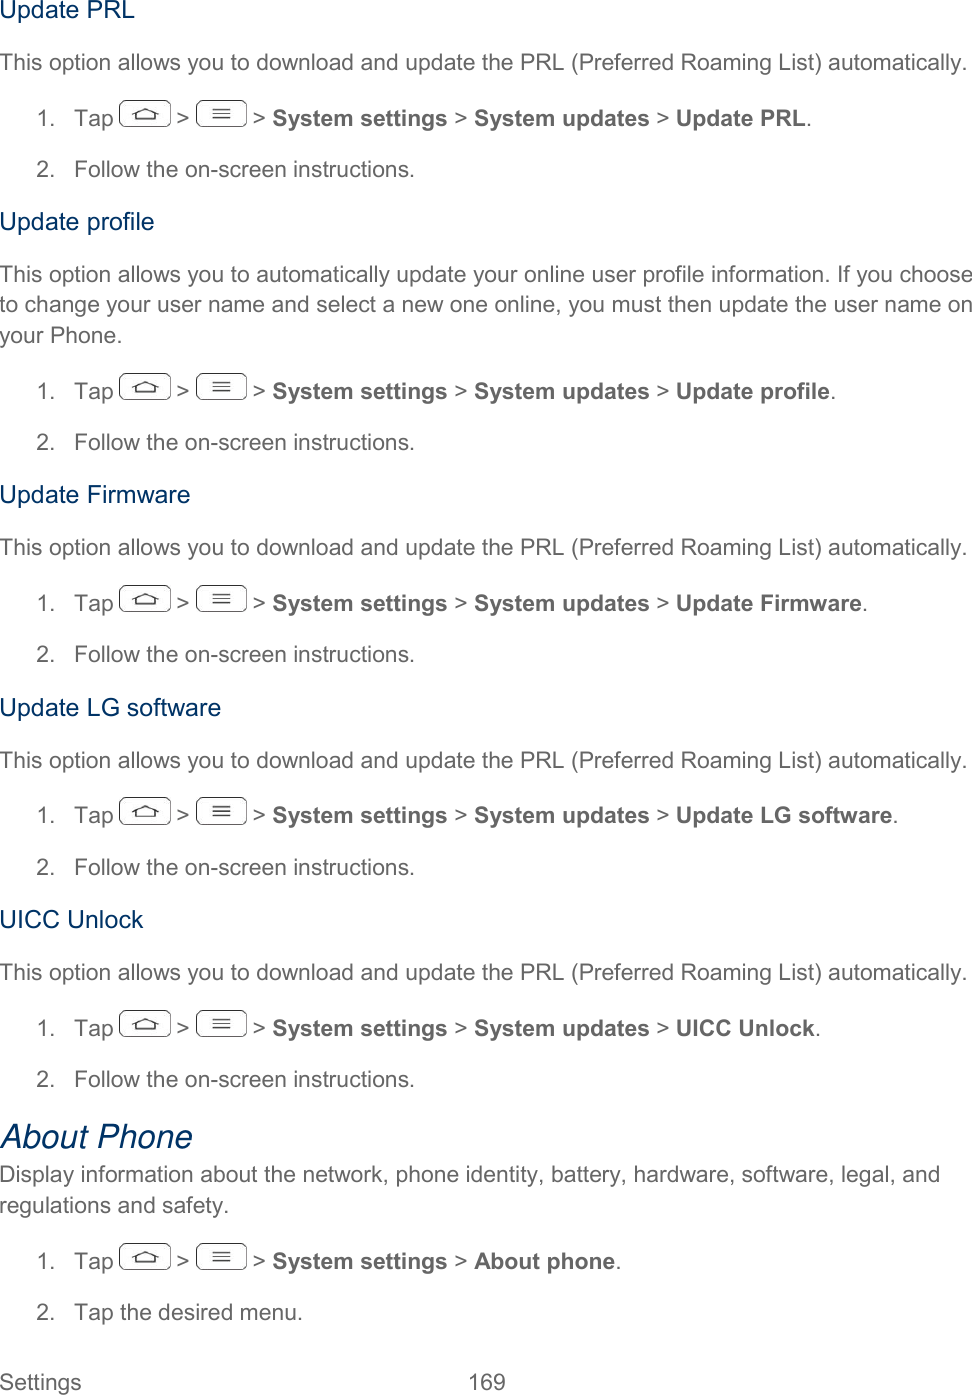  Settings  169   Update PRL This option allows you to download and update the PRL (Preferred Roaming List) automatically. 1.  Tap   &gt;   &gt; System settings &gt; System updates &gt; Update PRL. 2.  Follow the on-screen instructions. Update profile This option allows you to automatically update your online user profile information. If you choose to change your user name and select a new one online, you must then update the user name on your Phone. 1.  Tap   &gt;   &gt; System settings &gt; System updates &gt; Update profile. 2.  Follow the on-screen instructions. Update Firmware This option allows you to download and update the PRL (Preferred Roaming List) automatically. 1.  Tap   &gt;   &gt; System settings &gt; System updates &gt; Update Firmware. 2.  Follow the on-screen instructions. Update LG software This option allows you to download and update the PRL (Preferred Roaming List) automatically. 1.  Tap   &gt;   &gt; System settings &gt; System updates &gt; Update LG software. 2.  Follow the on-screen instructions. UICC Unlock This option allows you to download and update the PRL (Preferred Roaming List) automatically. 1.  Tap   &gt;   &gt; System settings &gt; System updates &gt; UICC Unlock. 2.  Follow the on-screen instructions. About Phone Display information about the network, phone identity, battery, hardware, software, legal, and regulations and safety. 1.  Tap   &gt;   &gt; System settings &gt; About phone. 2.  Tap the desired menu. 